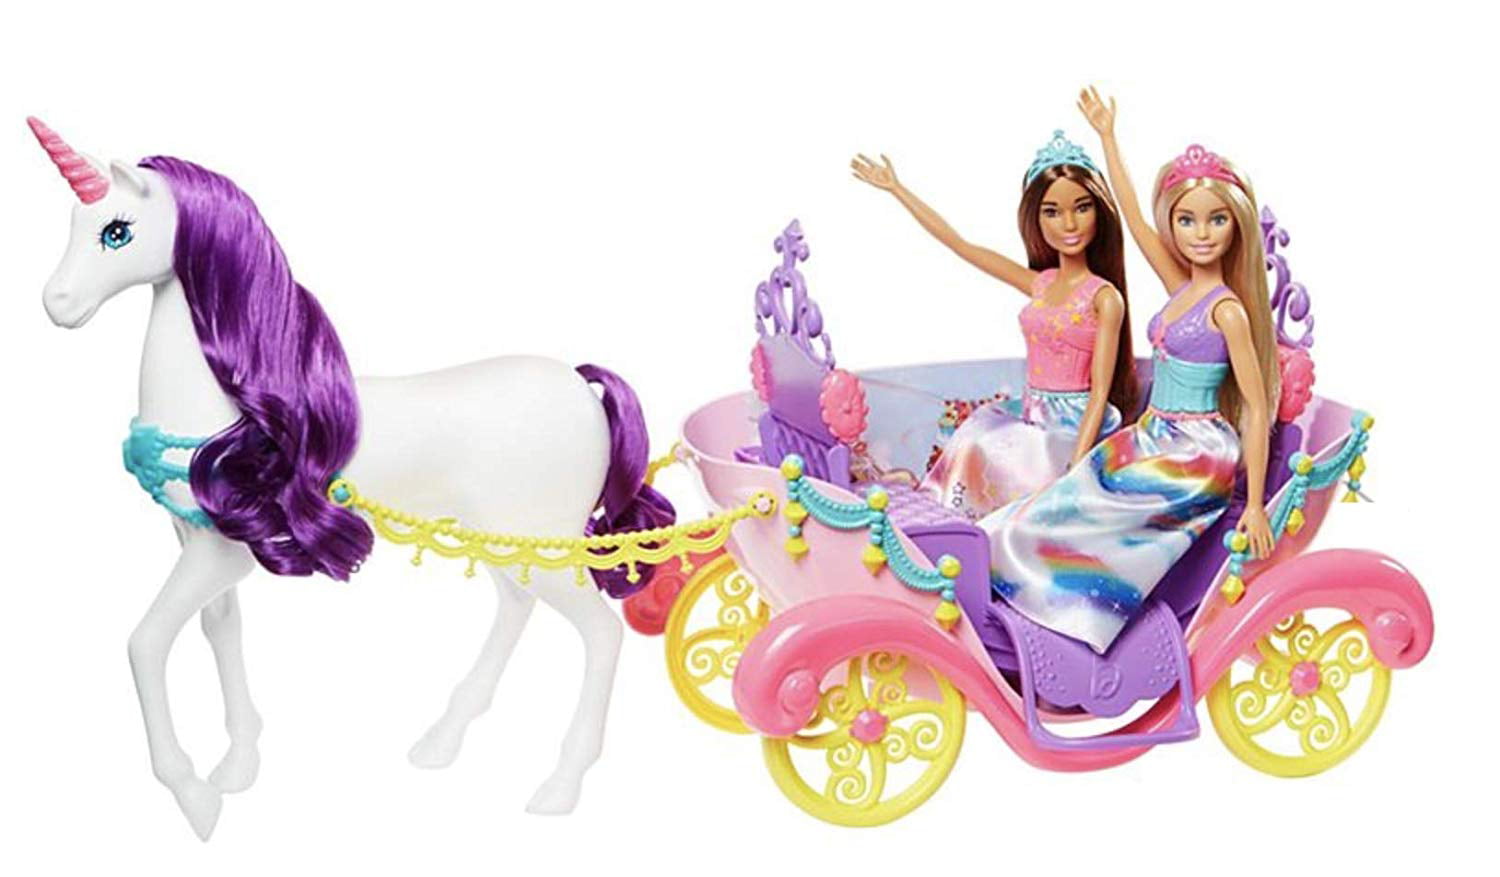 barbie dreamtopia sweetville carriage and princesses